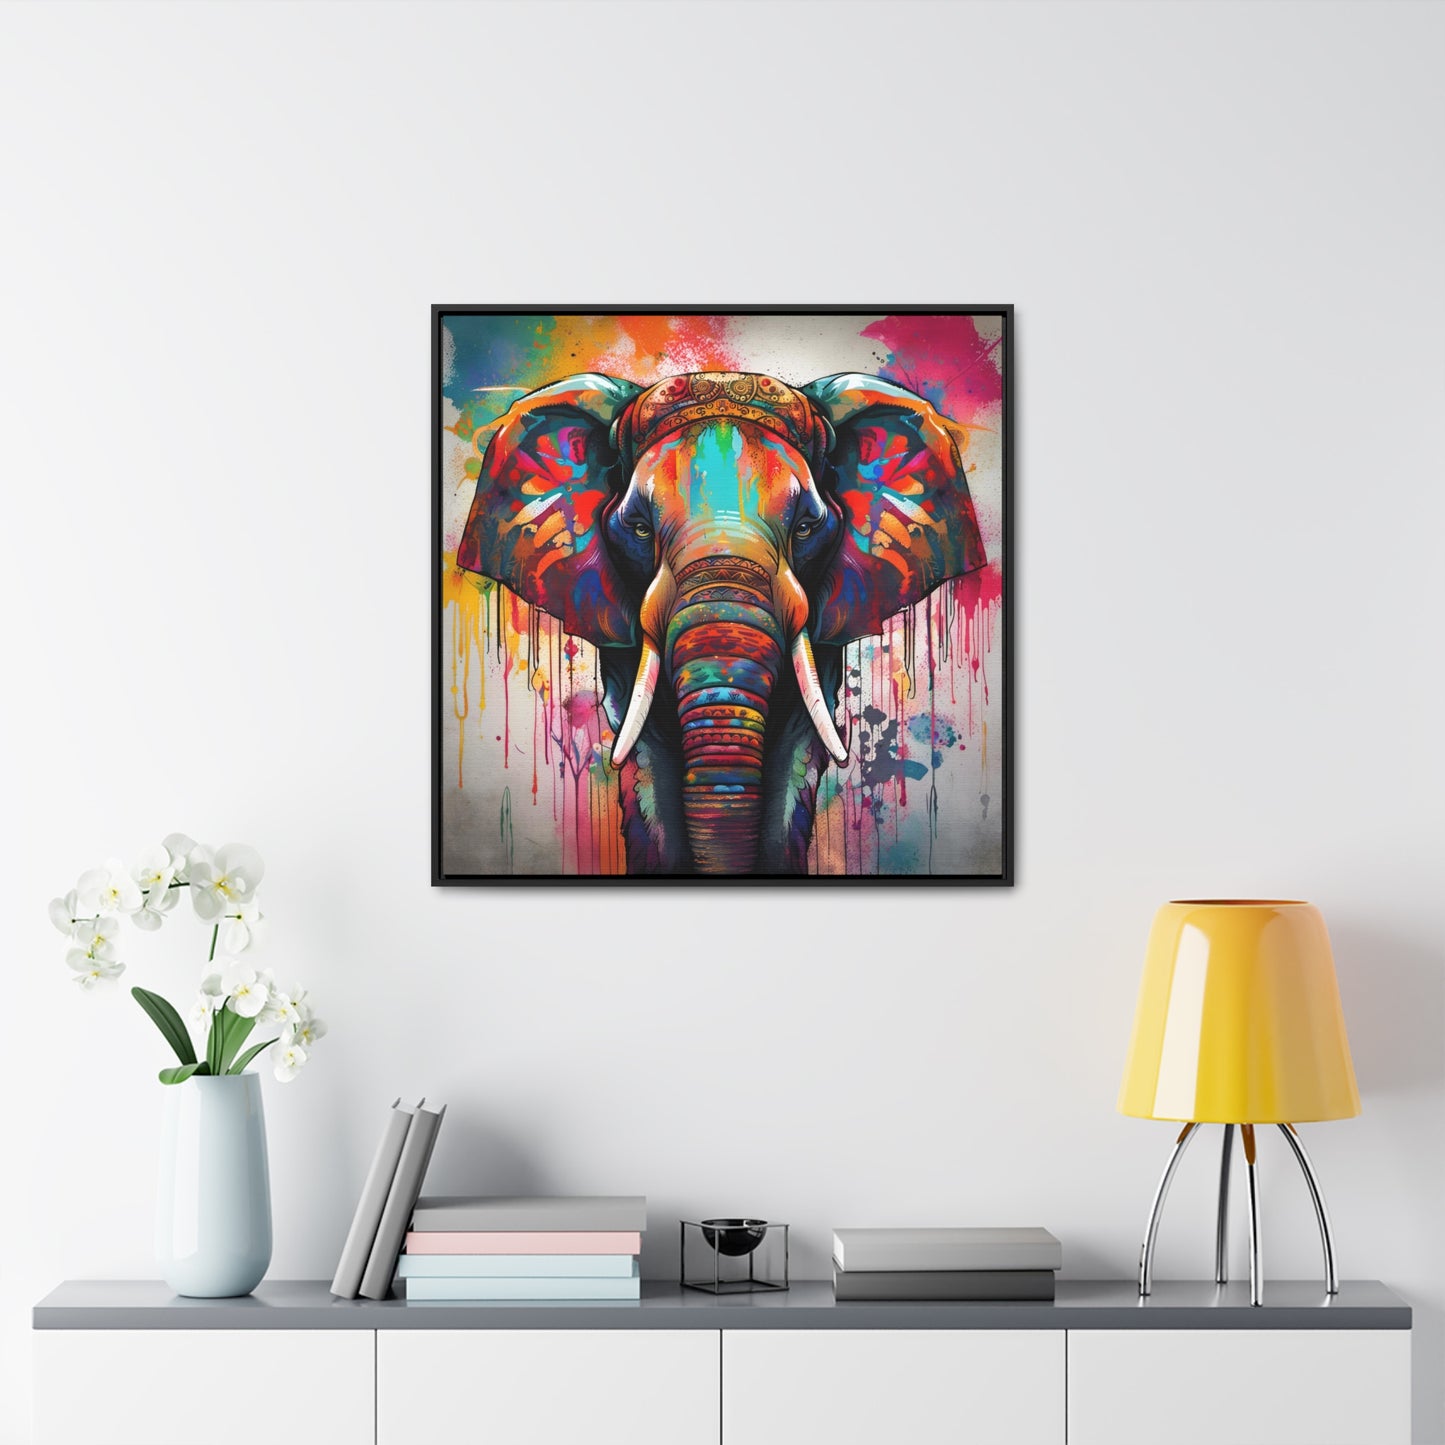 Dripping Colors Indian Elephant Print on Canvas in a Floating Frame 30x30